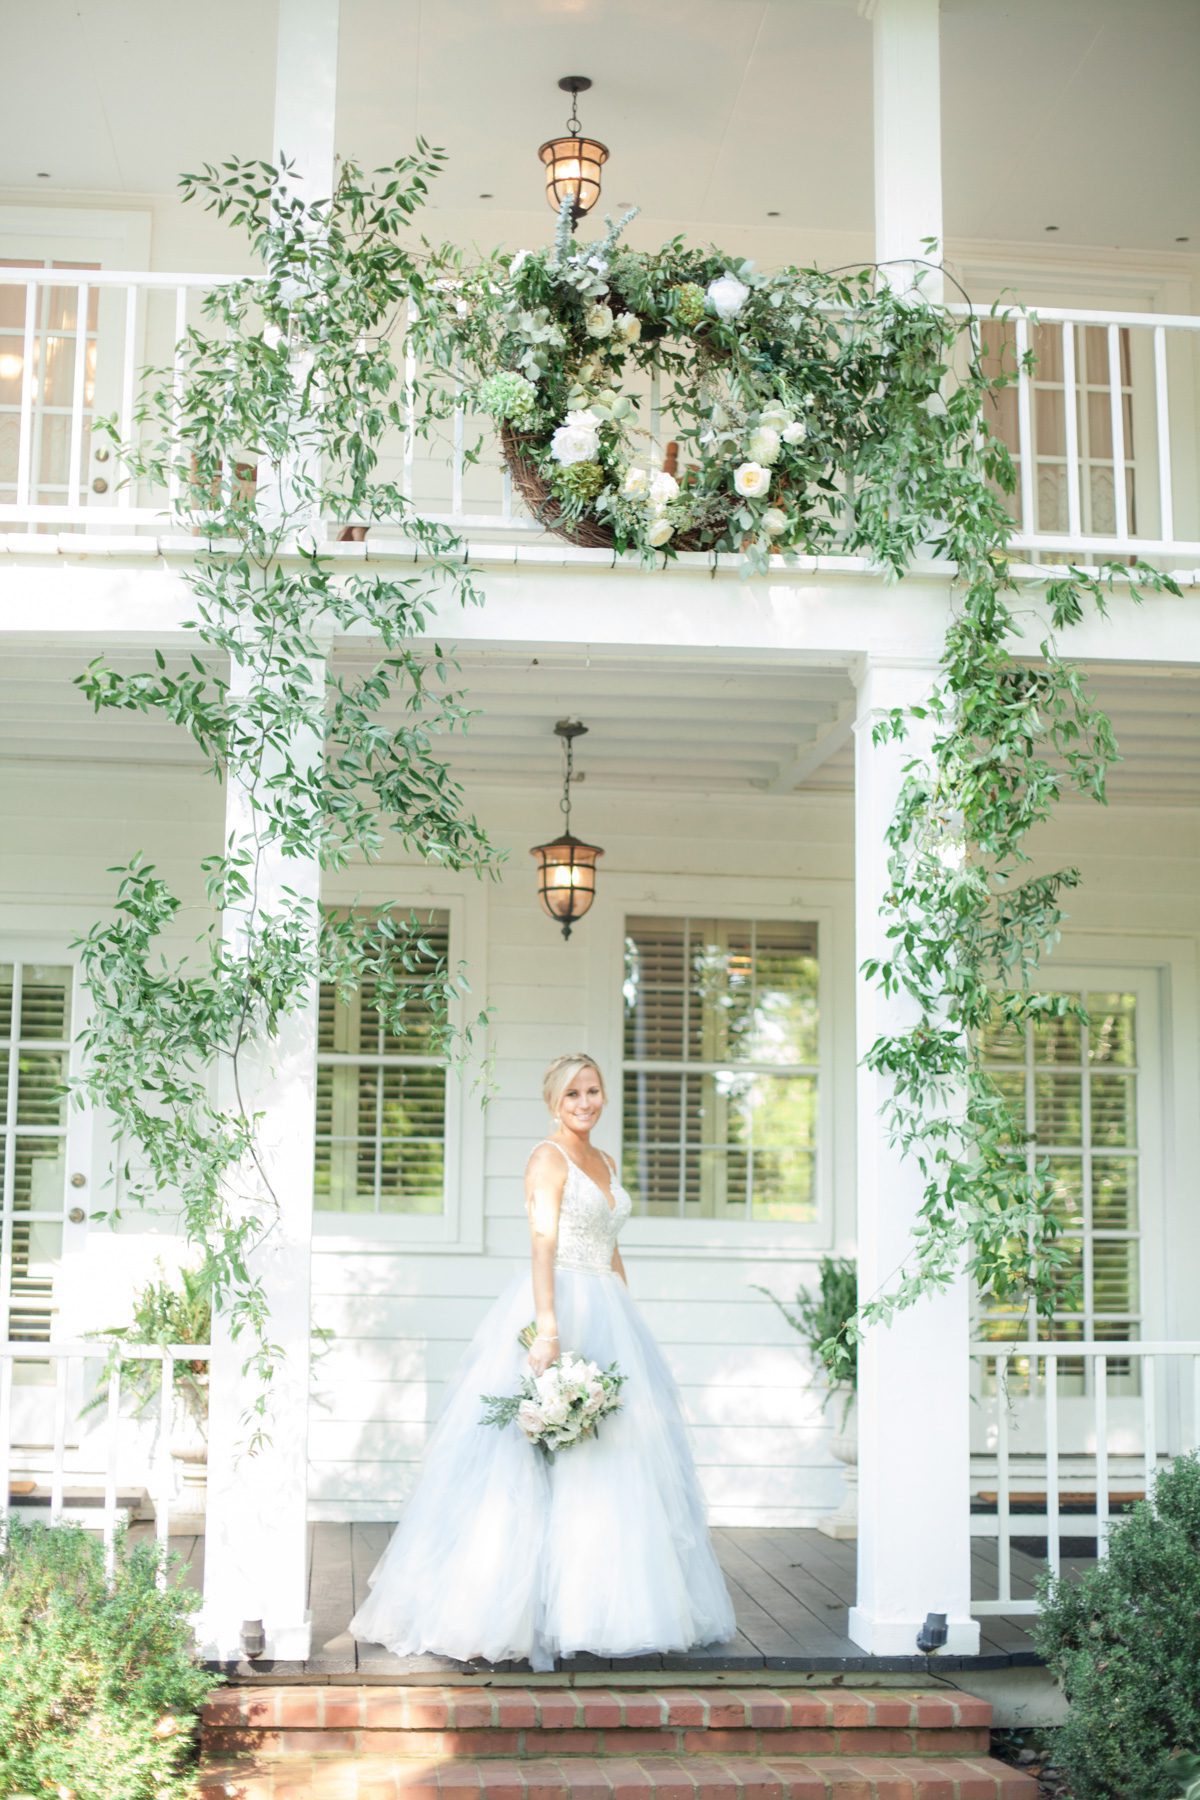 Bride before wedding ceremony. Wedding photography at Cedarwood Weddings and Estate in Nashville, TN photography by Krista Lee Photography